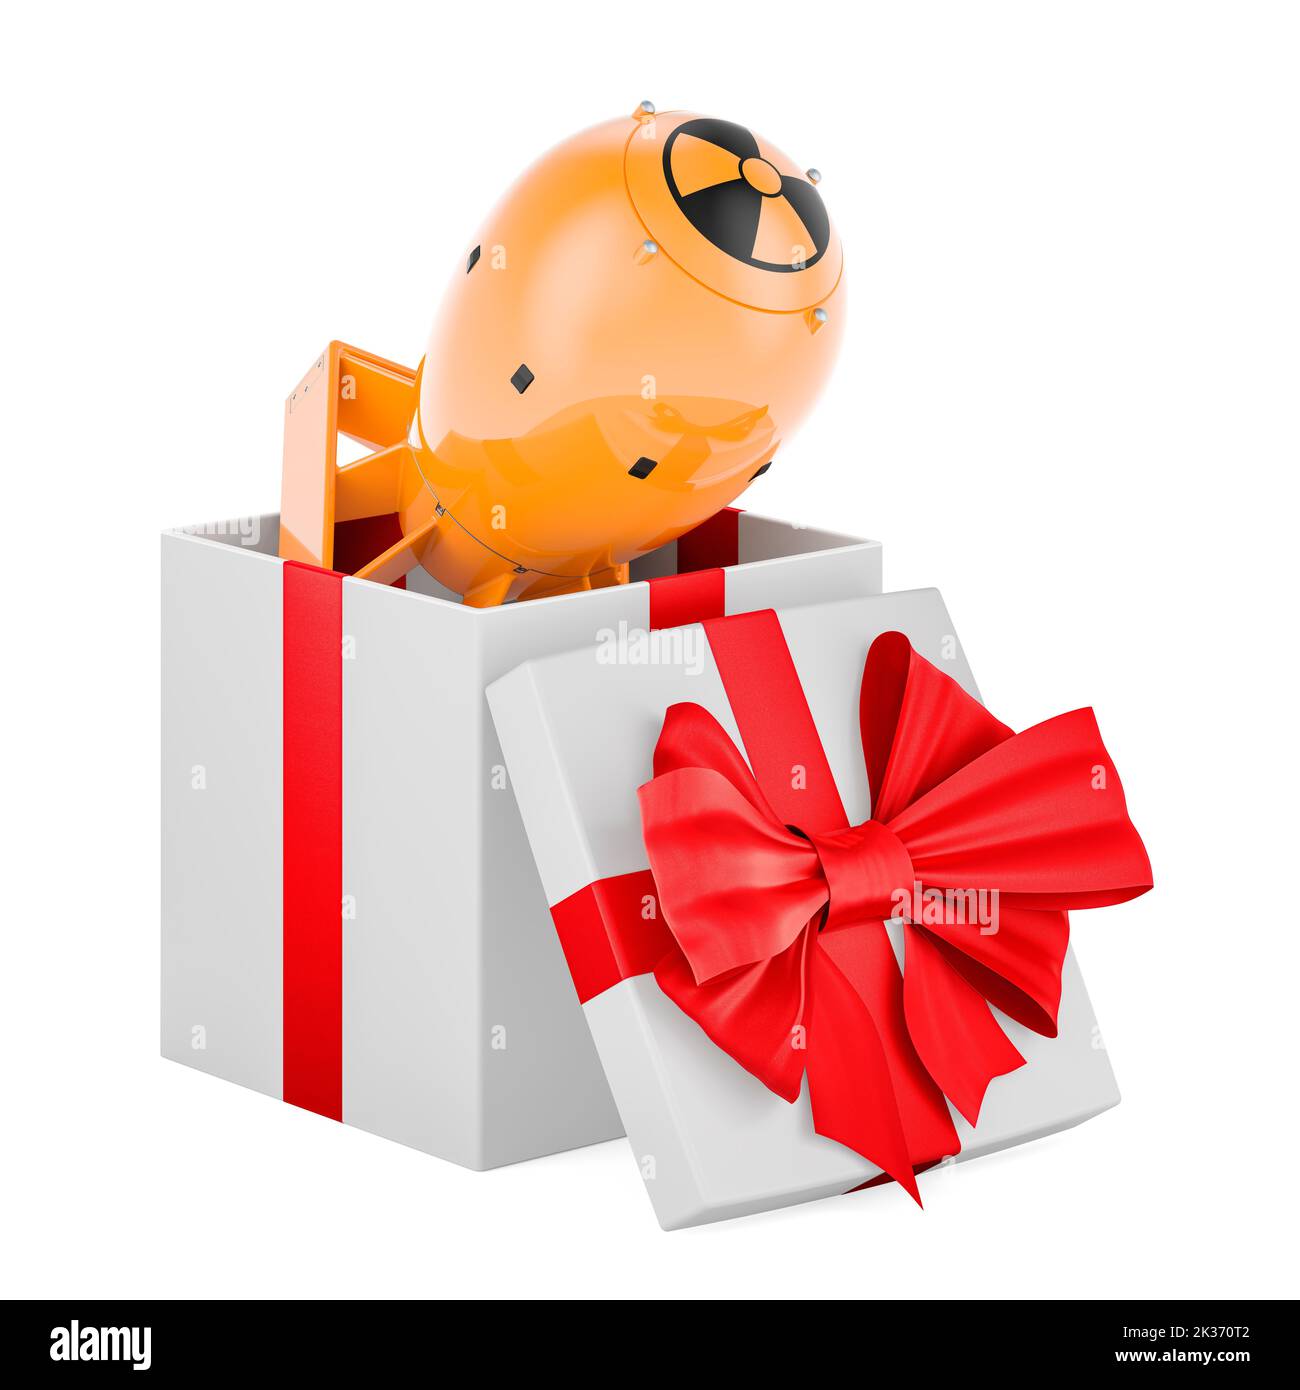 Nuclear bomb inside gift box, gift concept. 3D rendering isolated on white background Stock Photo